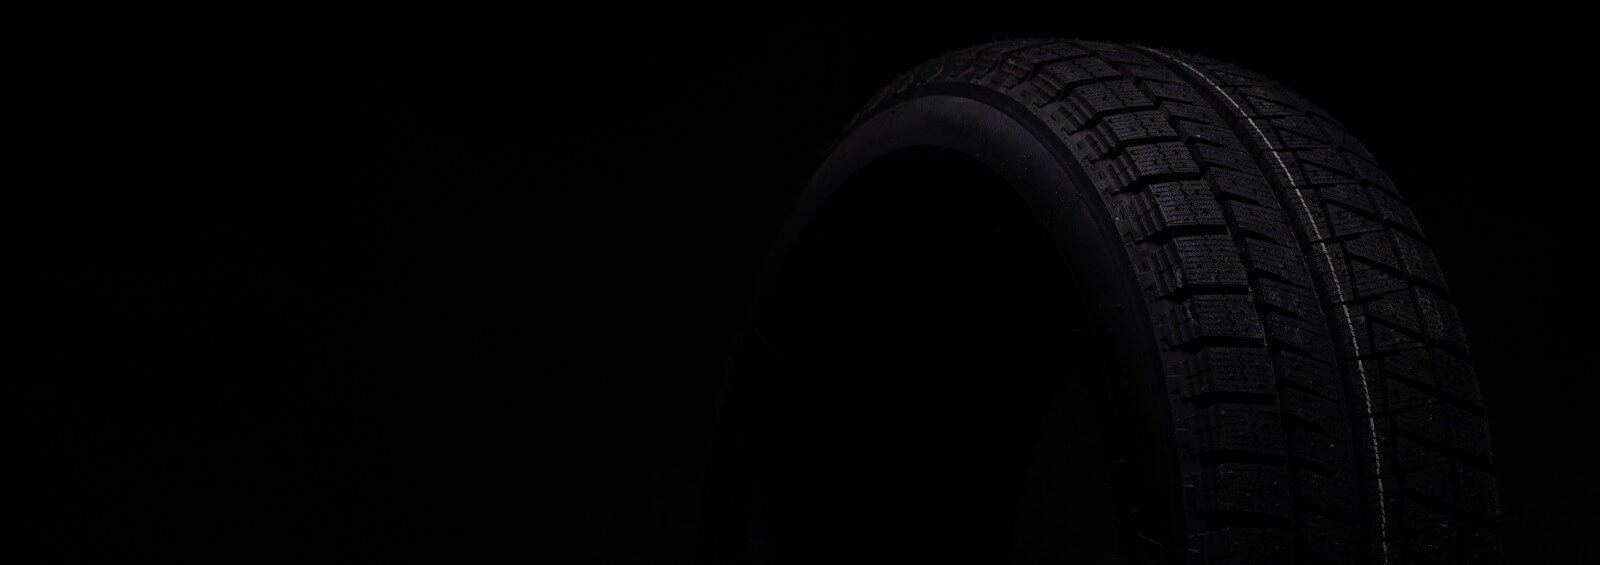 black tire on black isolated background.